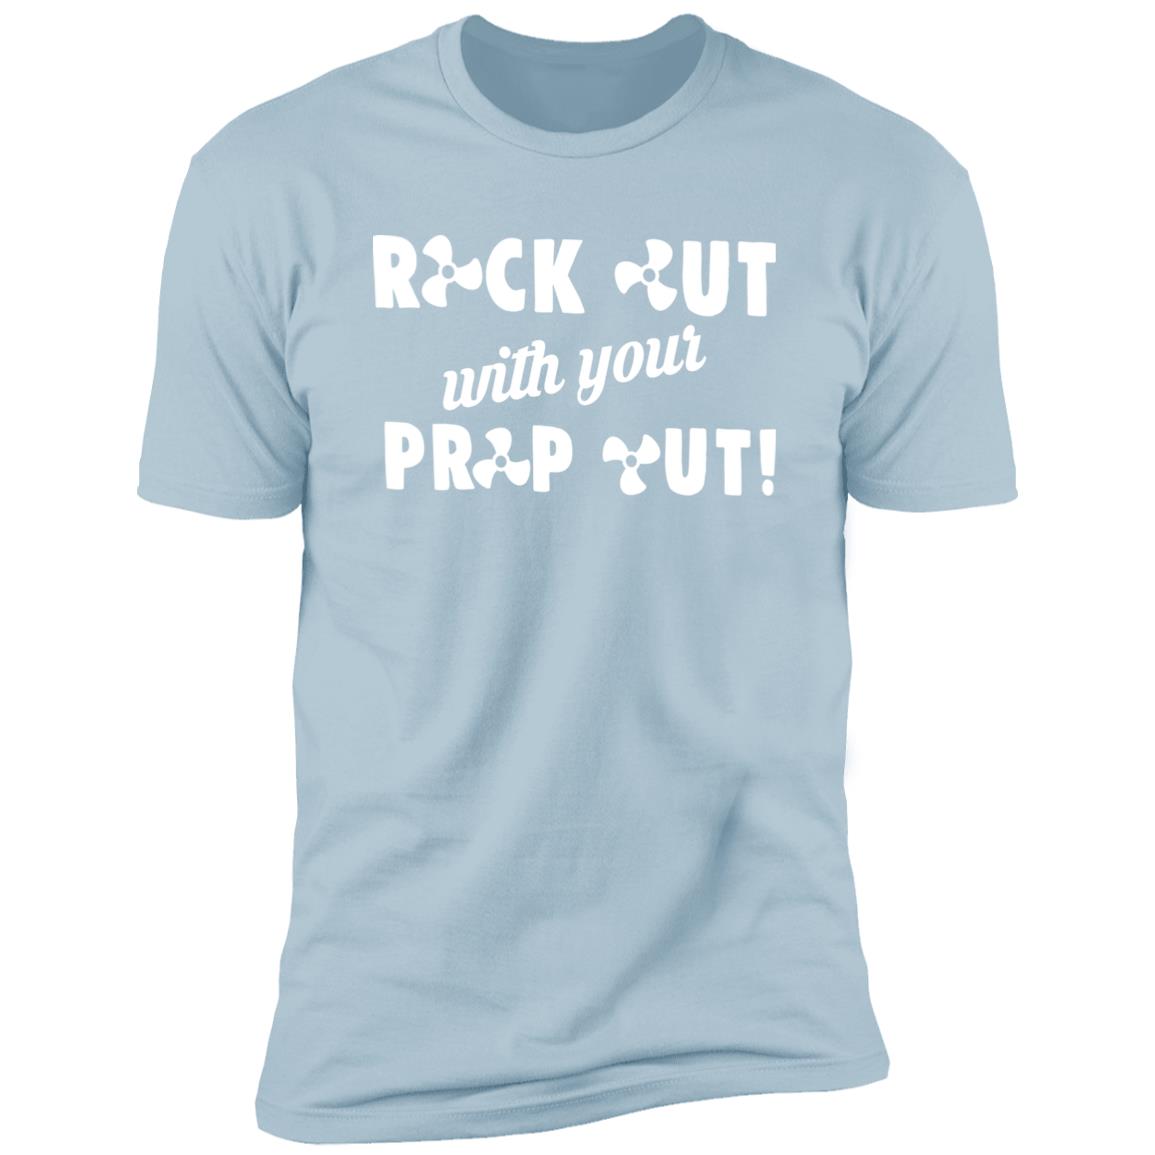 HRCL FL - Rock Out with your Prop Out - 2 Sided NL3600 Premium Short Sleeve T-Shirt